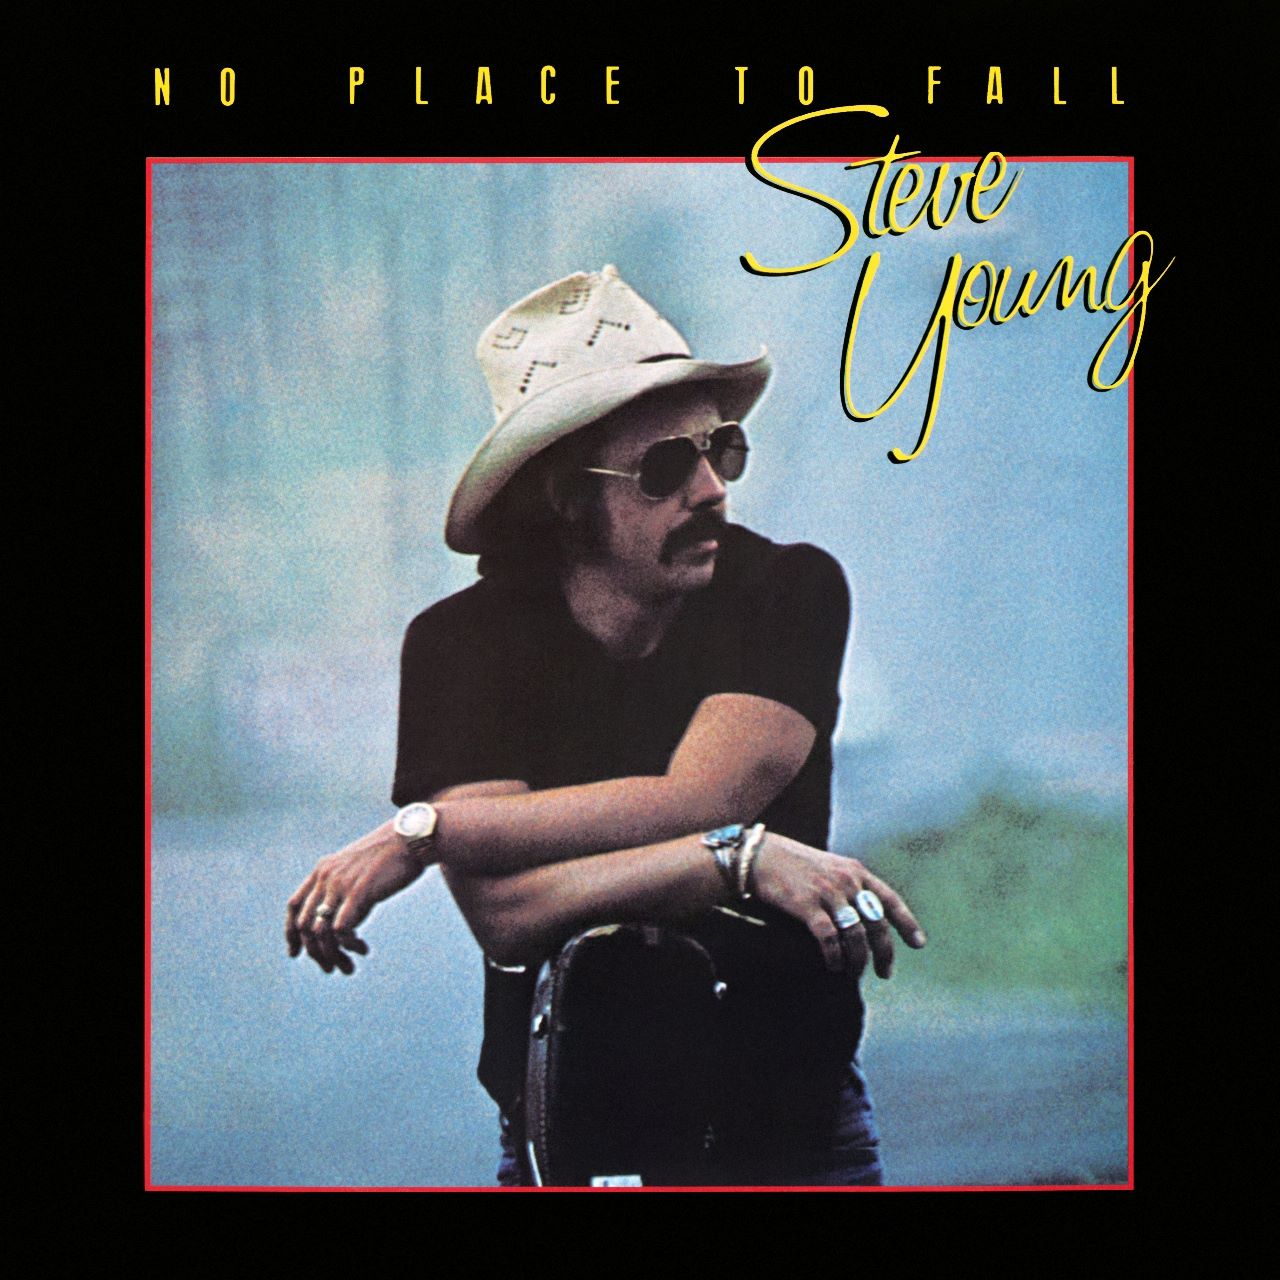 Steve Young - No Place To Fall cover album